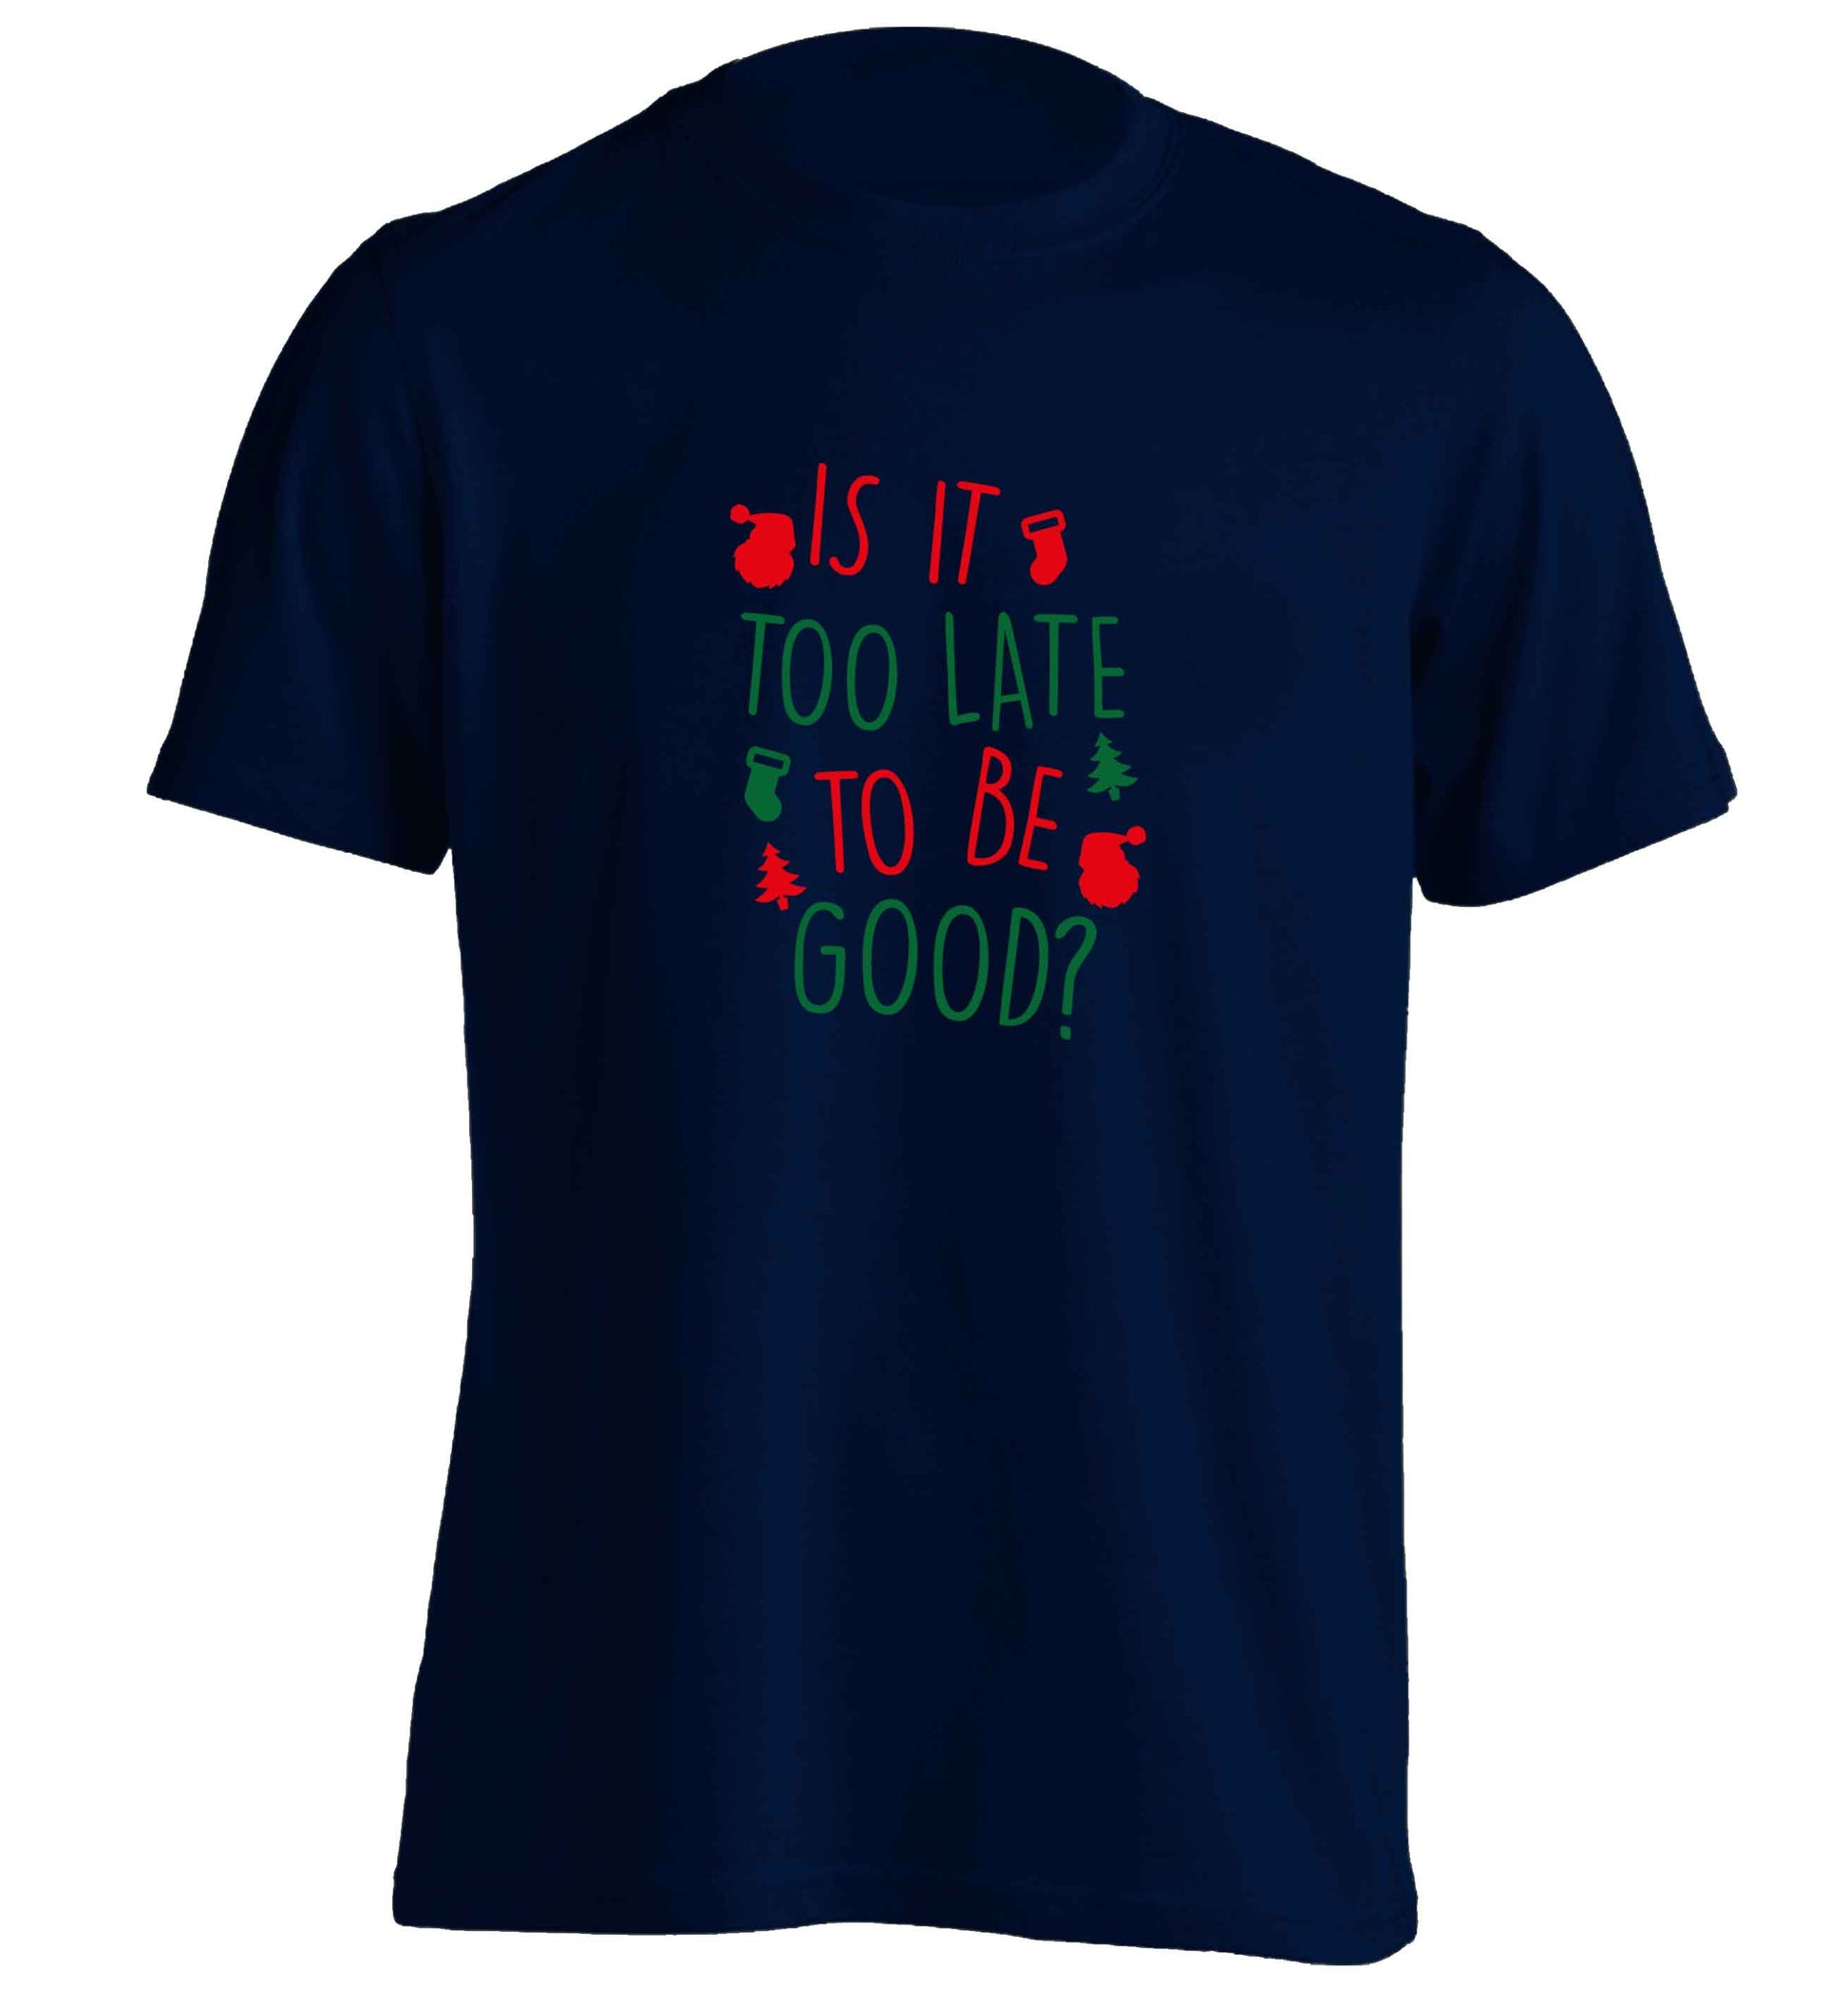 Too Late to be Good adults unisex navy Tshirt 2XL